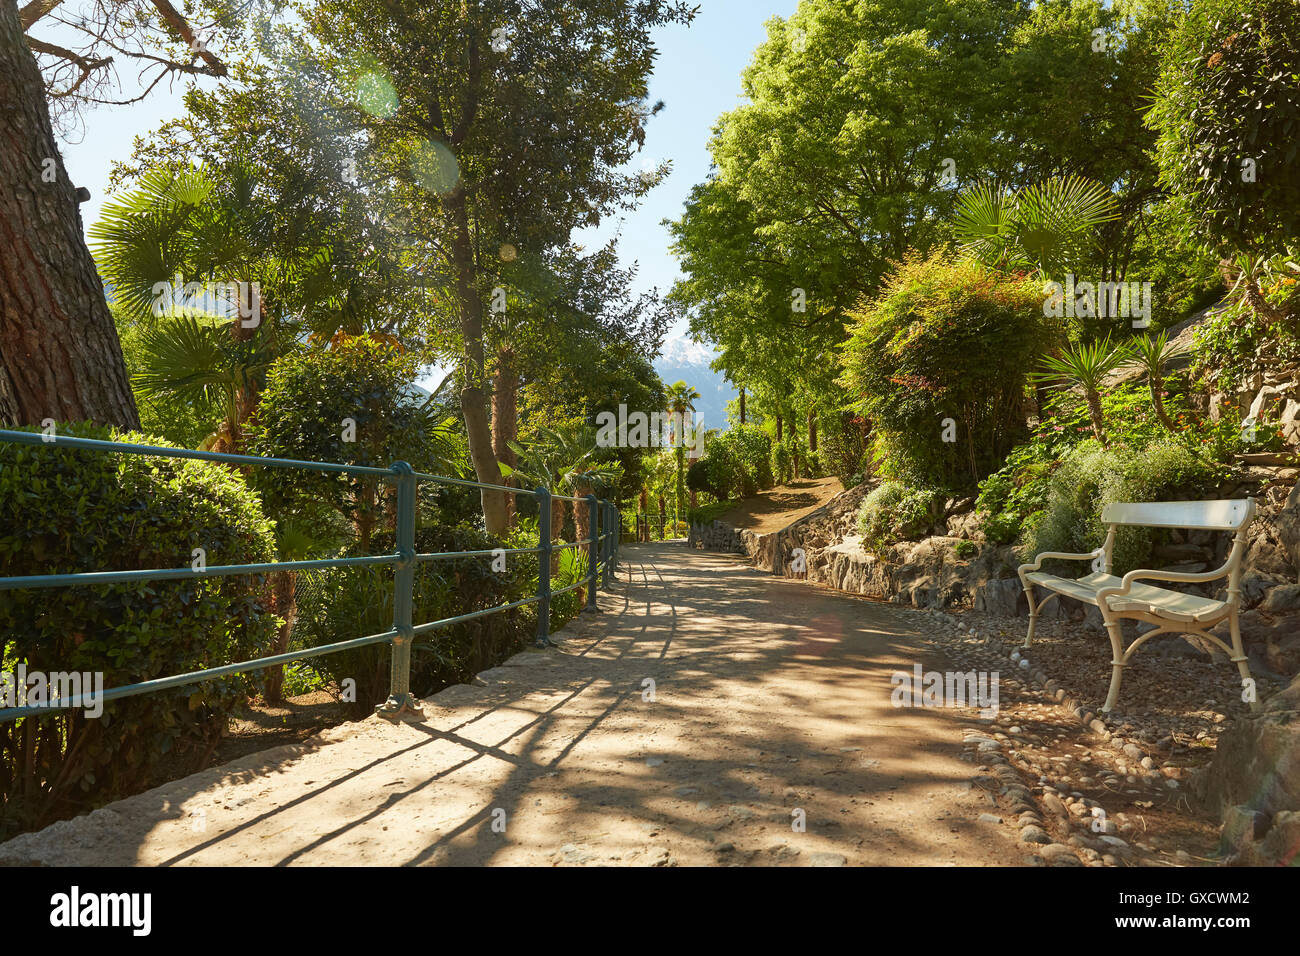 Empty bench on rural pathway, Meran, South Tyrol, Italy Stock Photo